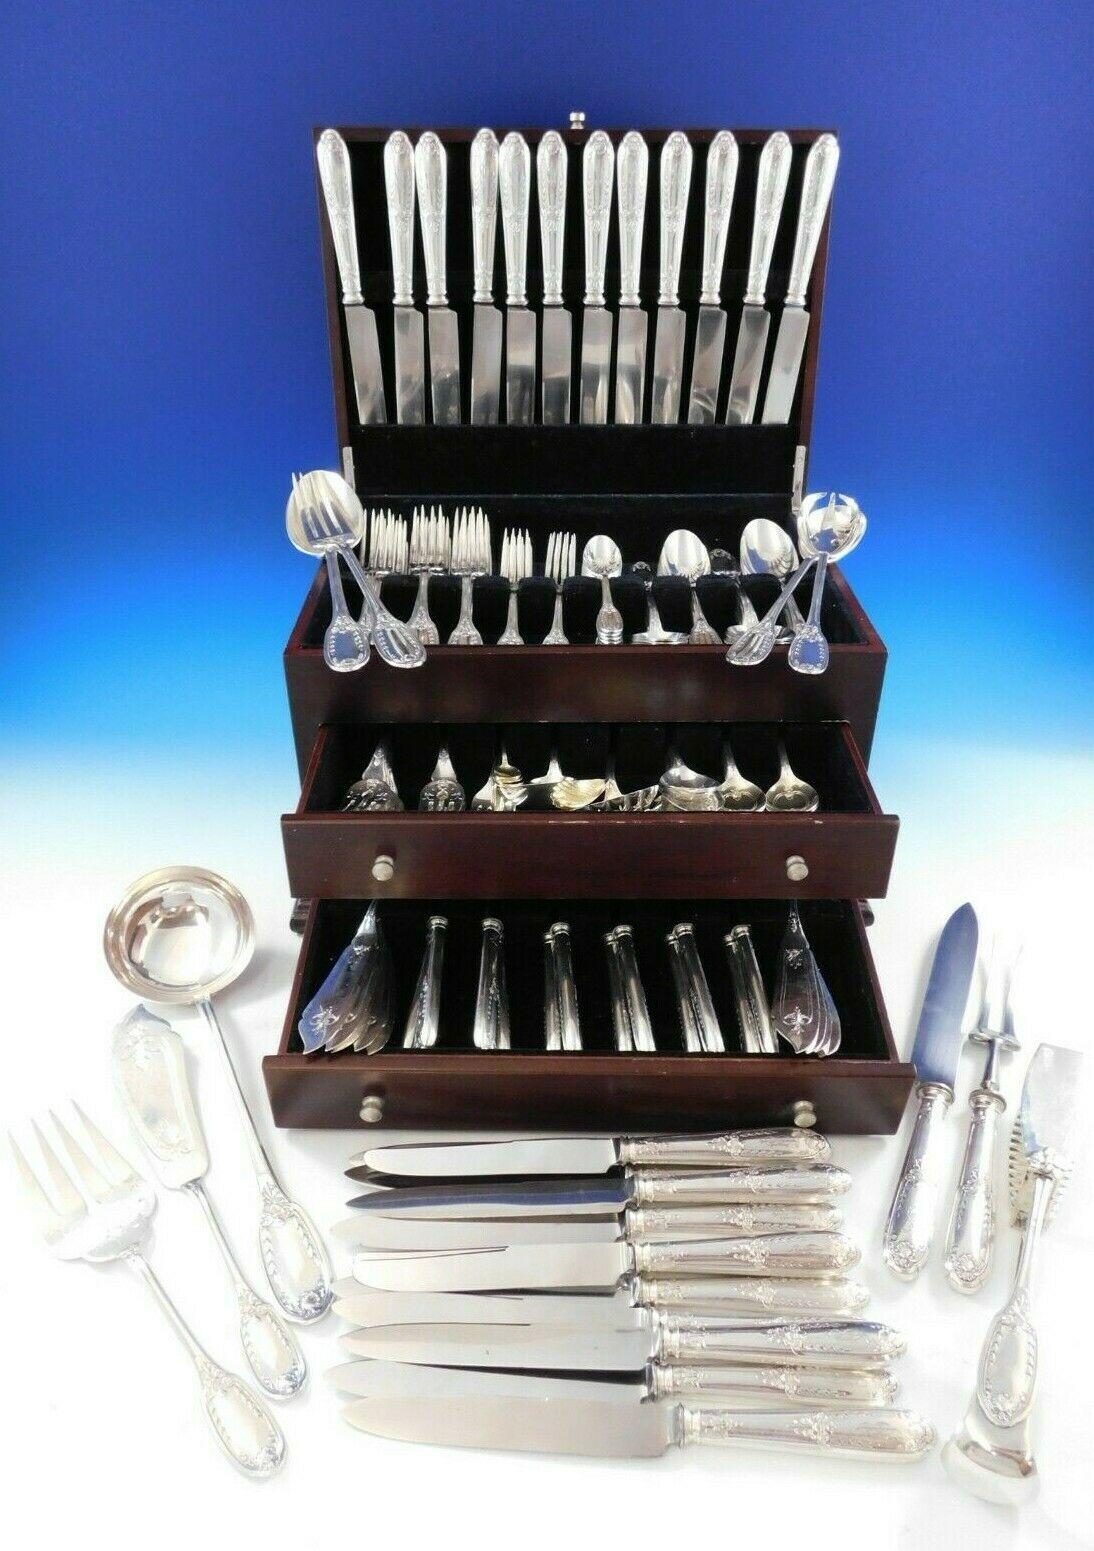 Monumental Empire-style 800 Silver German Flatware set - 168 pieces. The pieces have a classic leaf, shell, and flower handle design and on the reverse angel wings and a torch at the base of the handle. This set includes:

24 large continental size